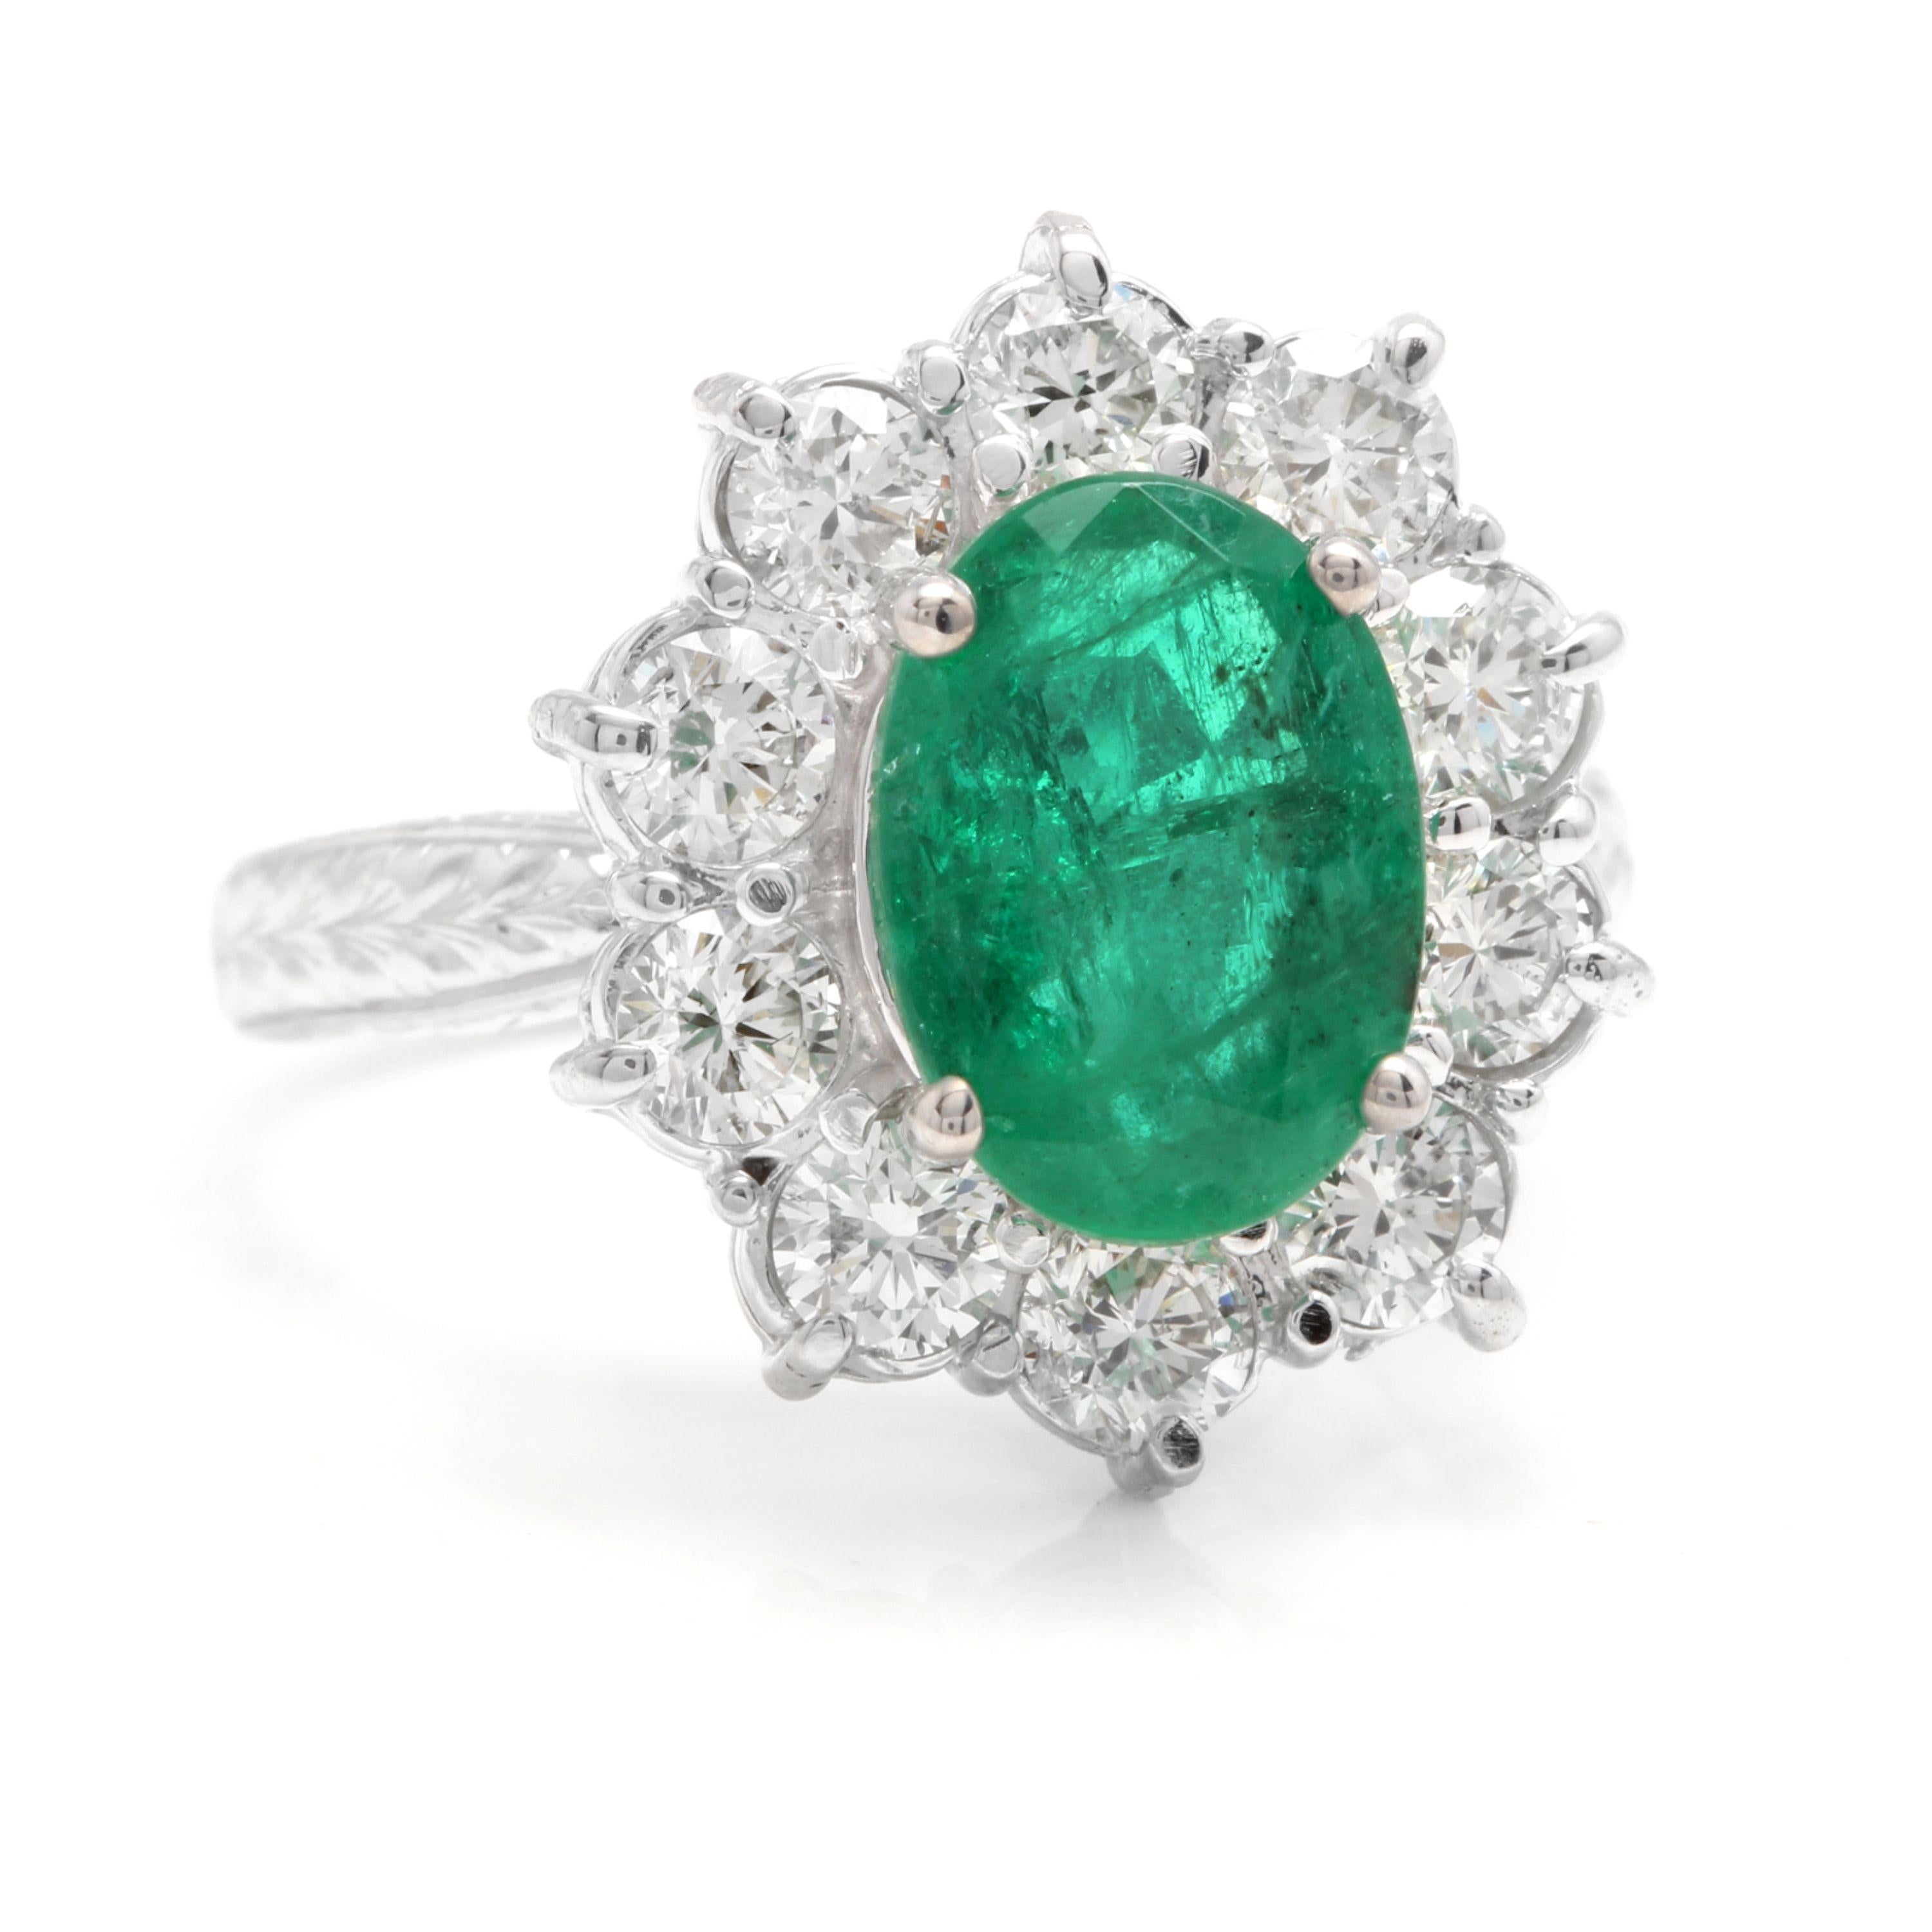 5.20 Carats Exquisite Emerald and Diamond 14K Solid White Gold Ring

Total Emerald Weight is: Approx. 3.50 Carats

Emerald Measures: 10.00 x 8.00mm

Natural Round Diamonds Weight: Approx. 1.70 Carats (color G-H / Clarity SI1-SI2)

Ring size: 6 (we